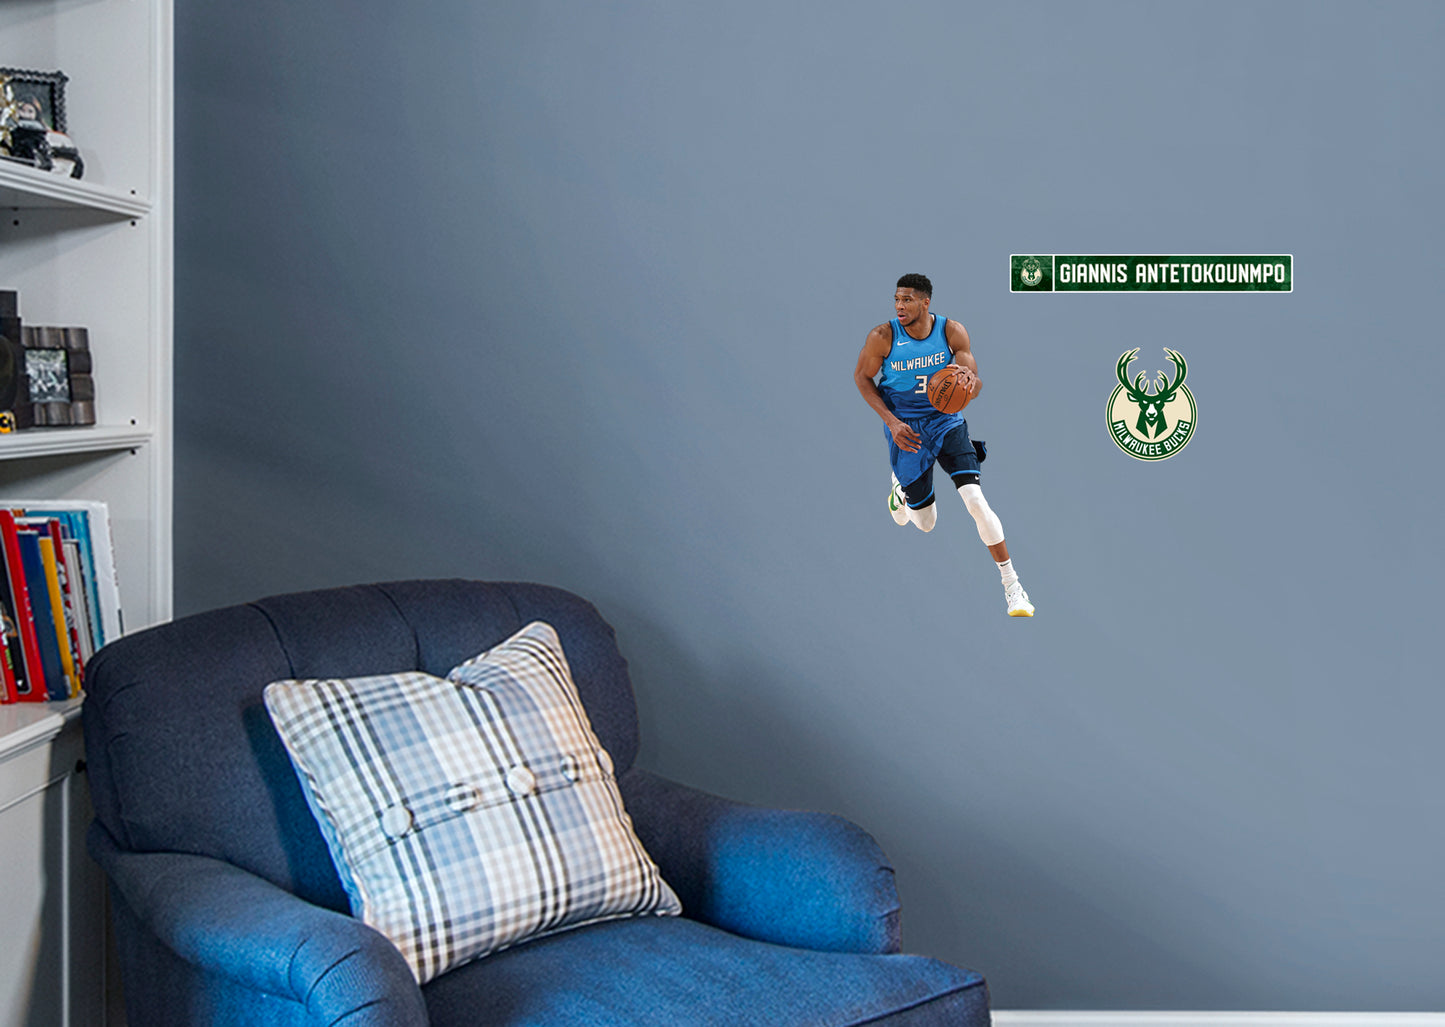 Giannis Antetokounmpo 2021  - Officially Licensed NBA Removable Wall Decal